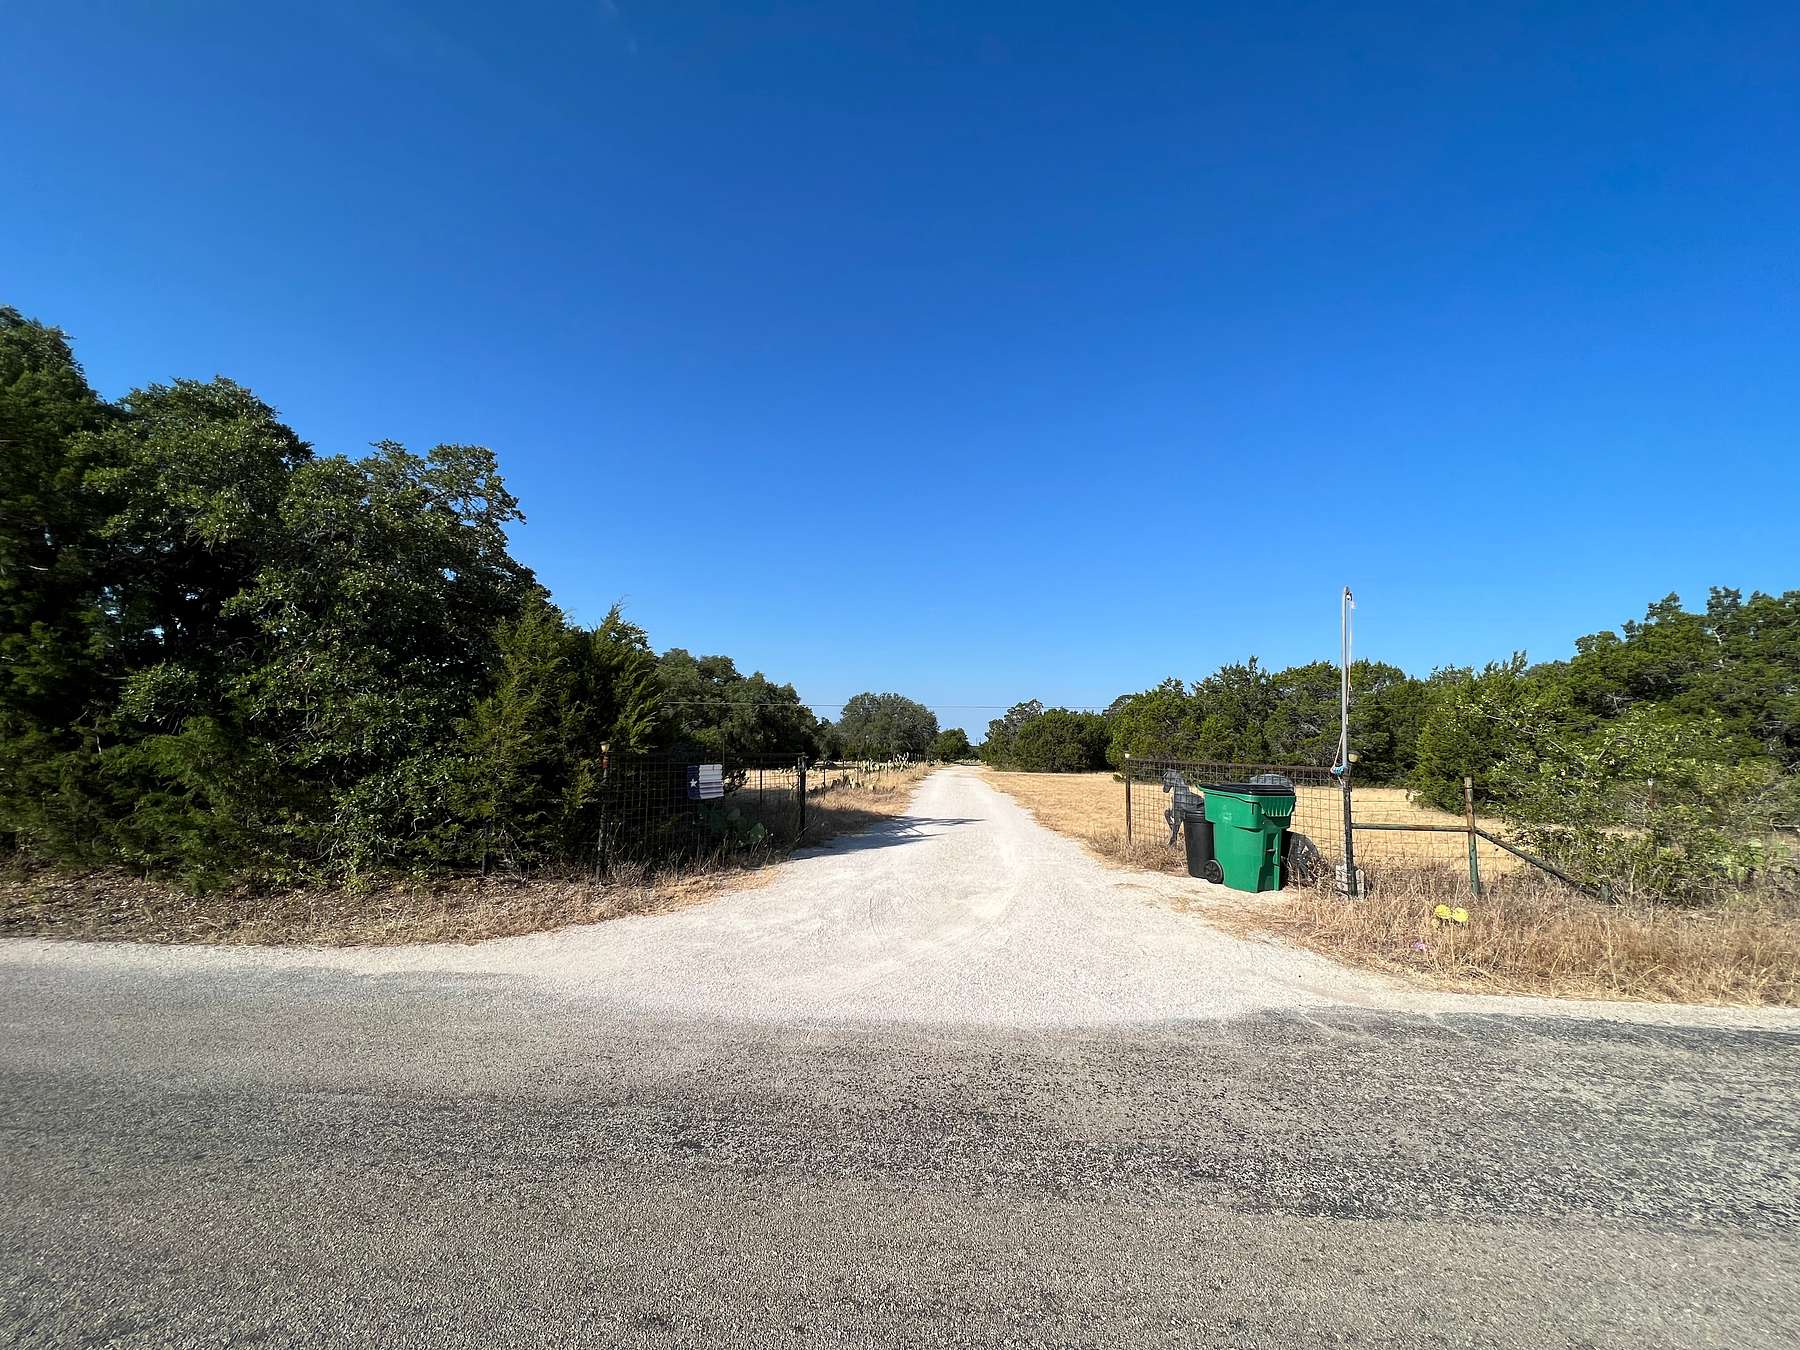 25 Acres of Land with Home for Sale in Lampasas, Texas